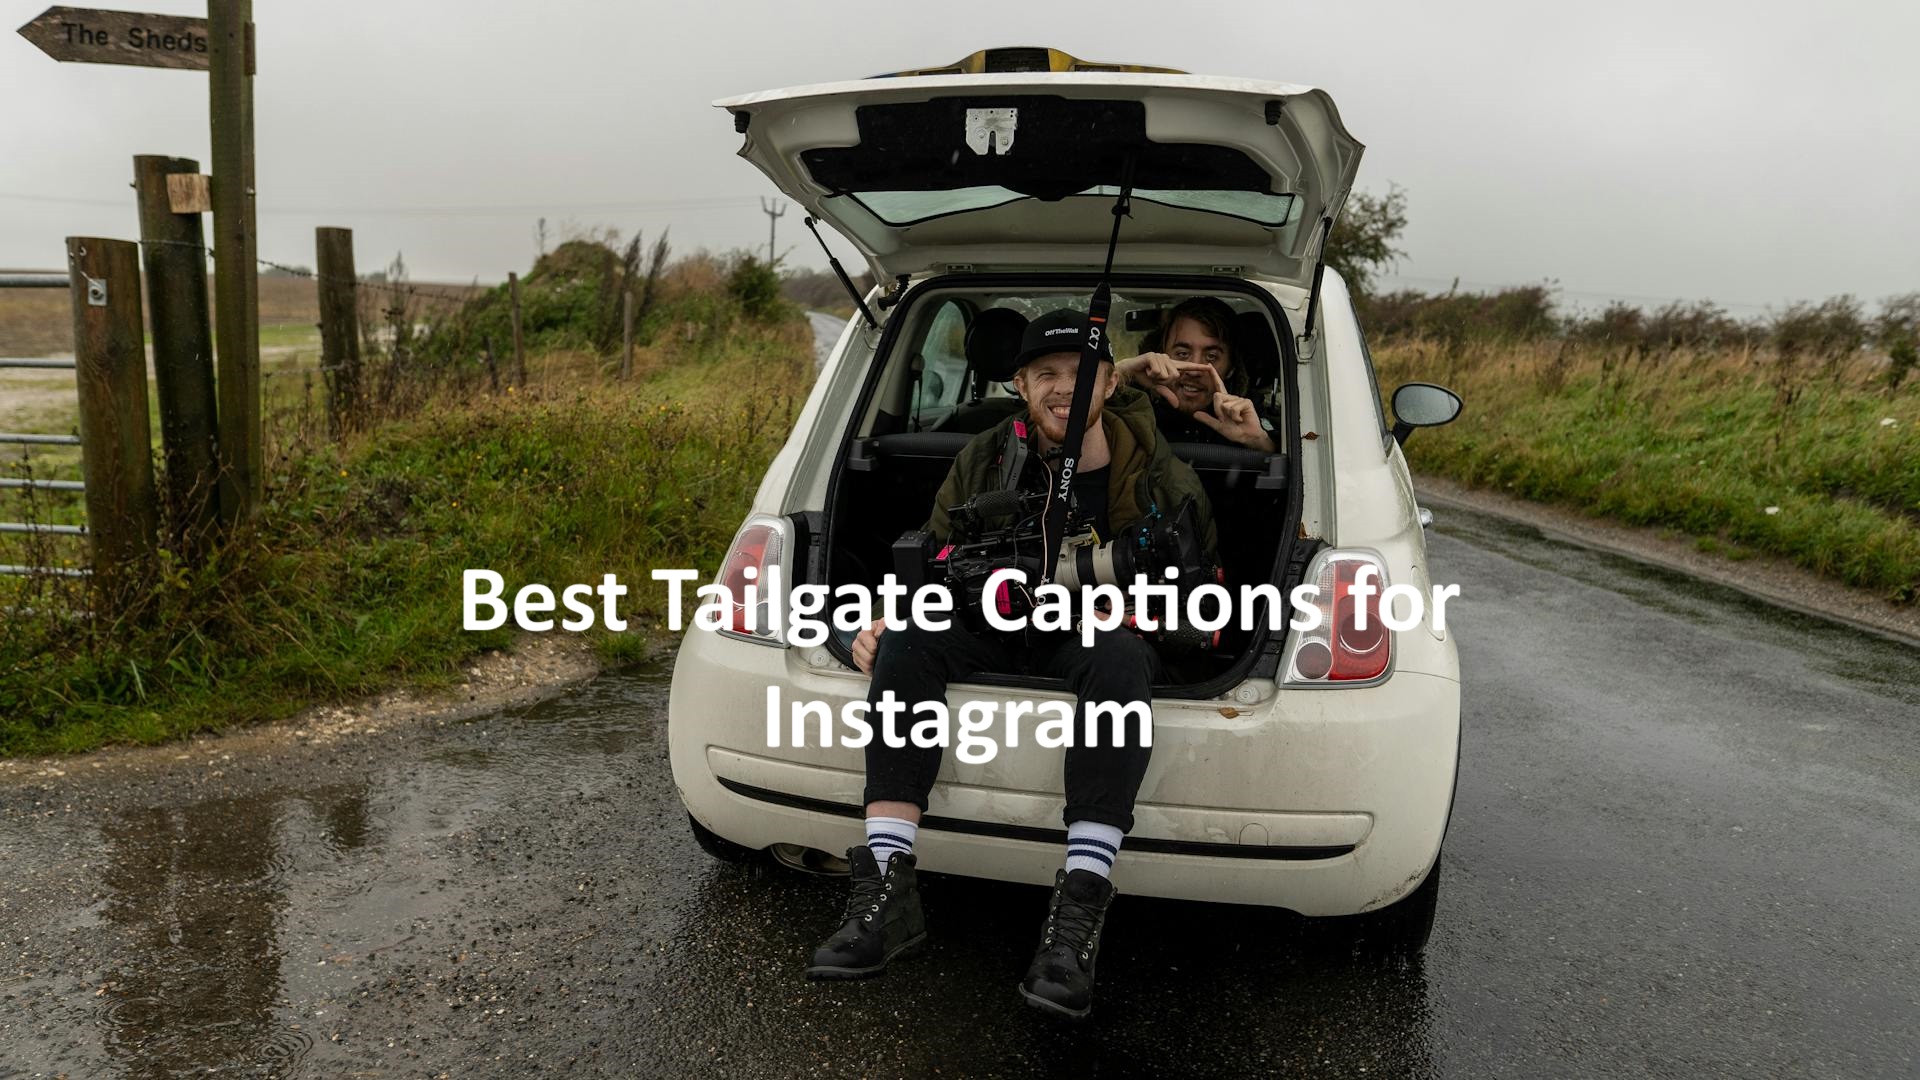 Tailgate Captions for Instagram